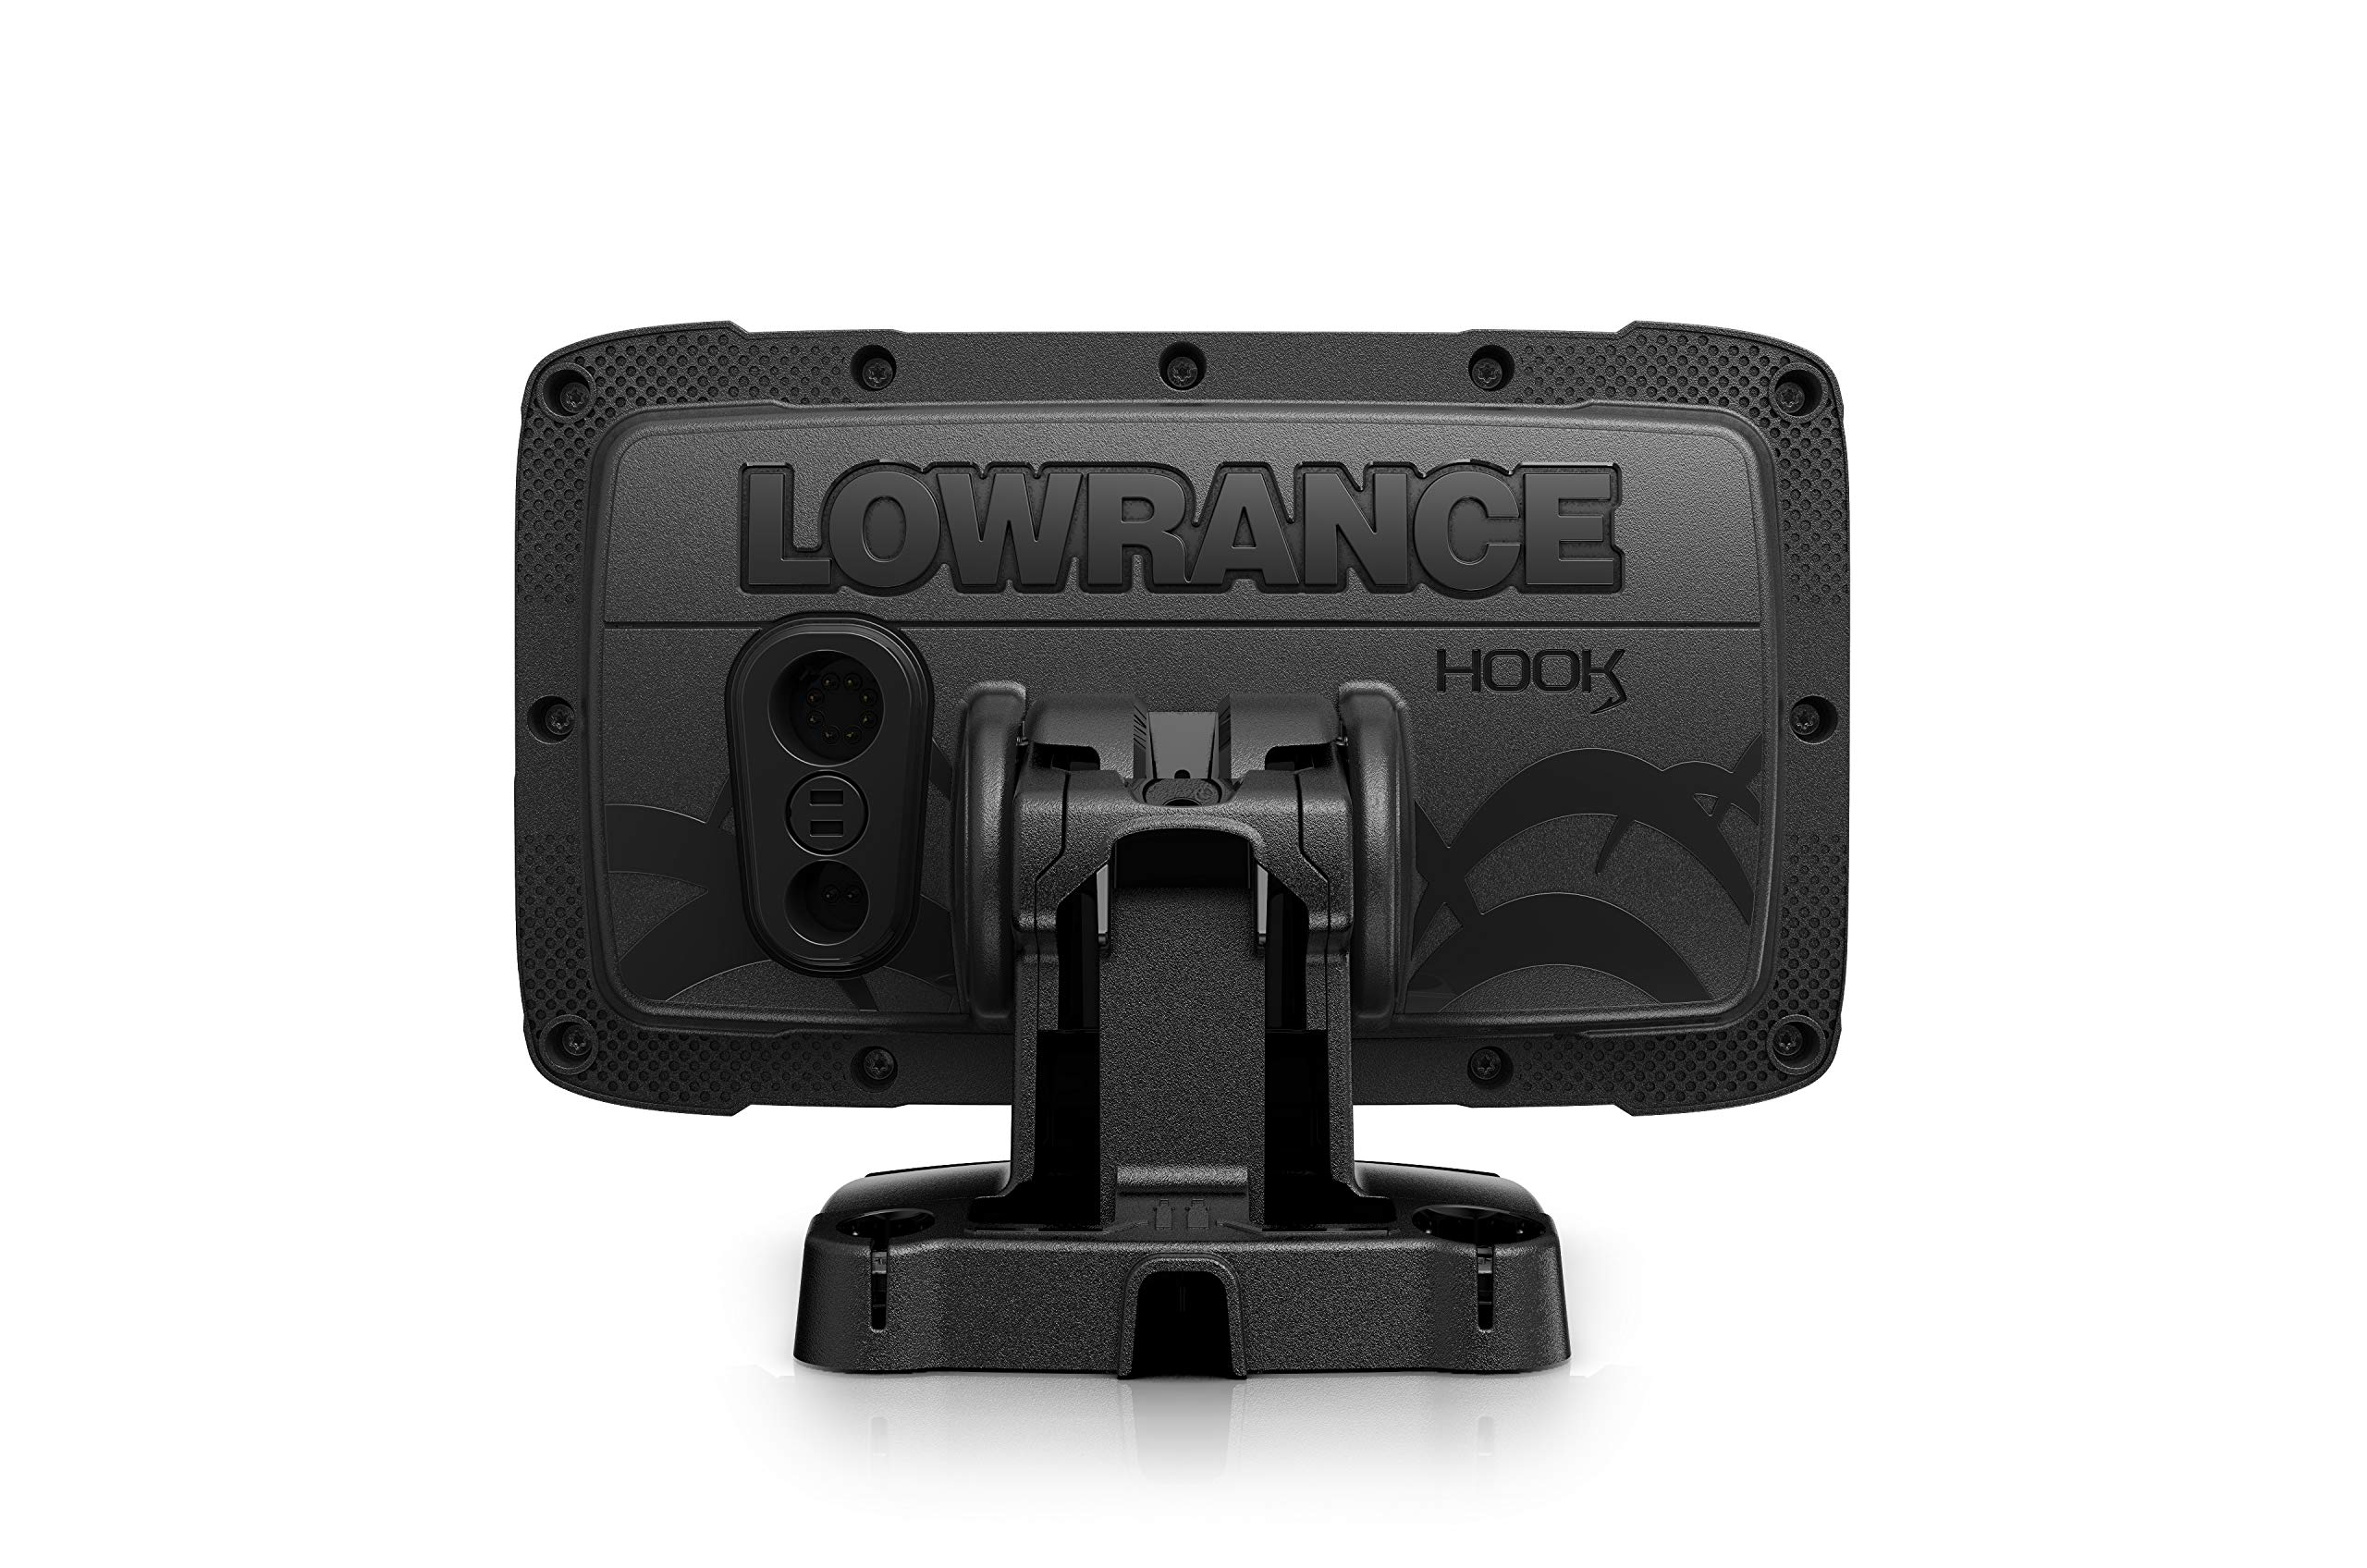 Lowrance Hook Reveal 5 Inch Fish Finders with Transducer, Plus Optional Preloaded Maps